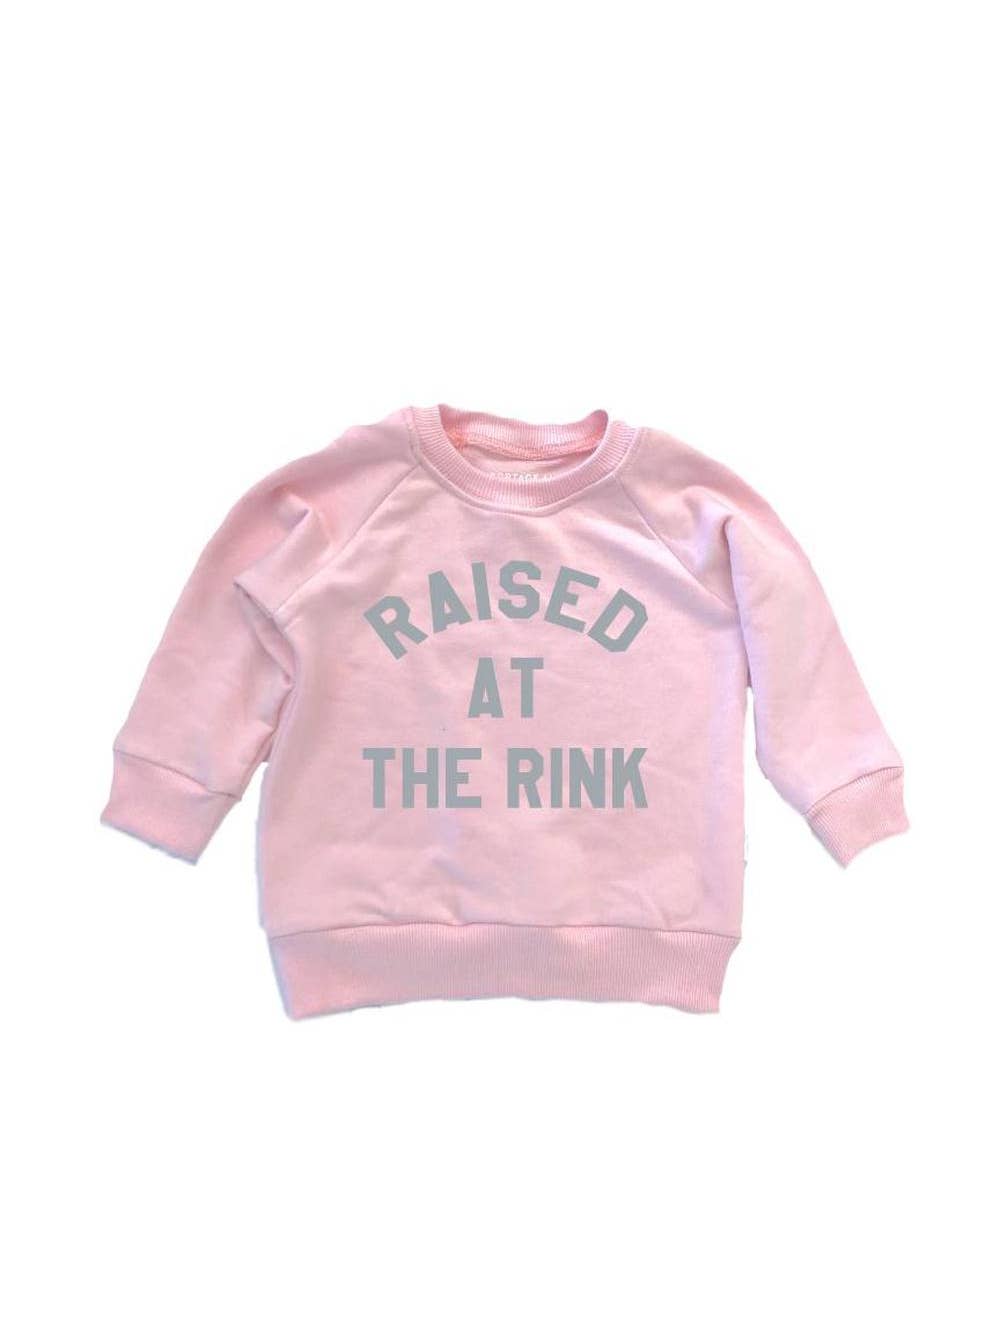 rAiSeD aT tHe RiNk